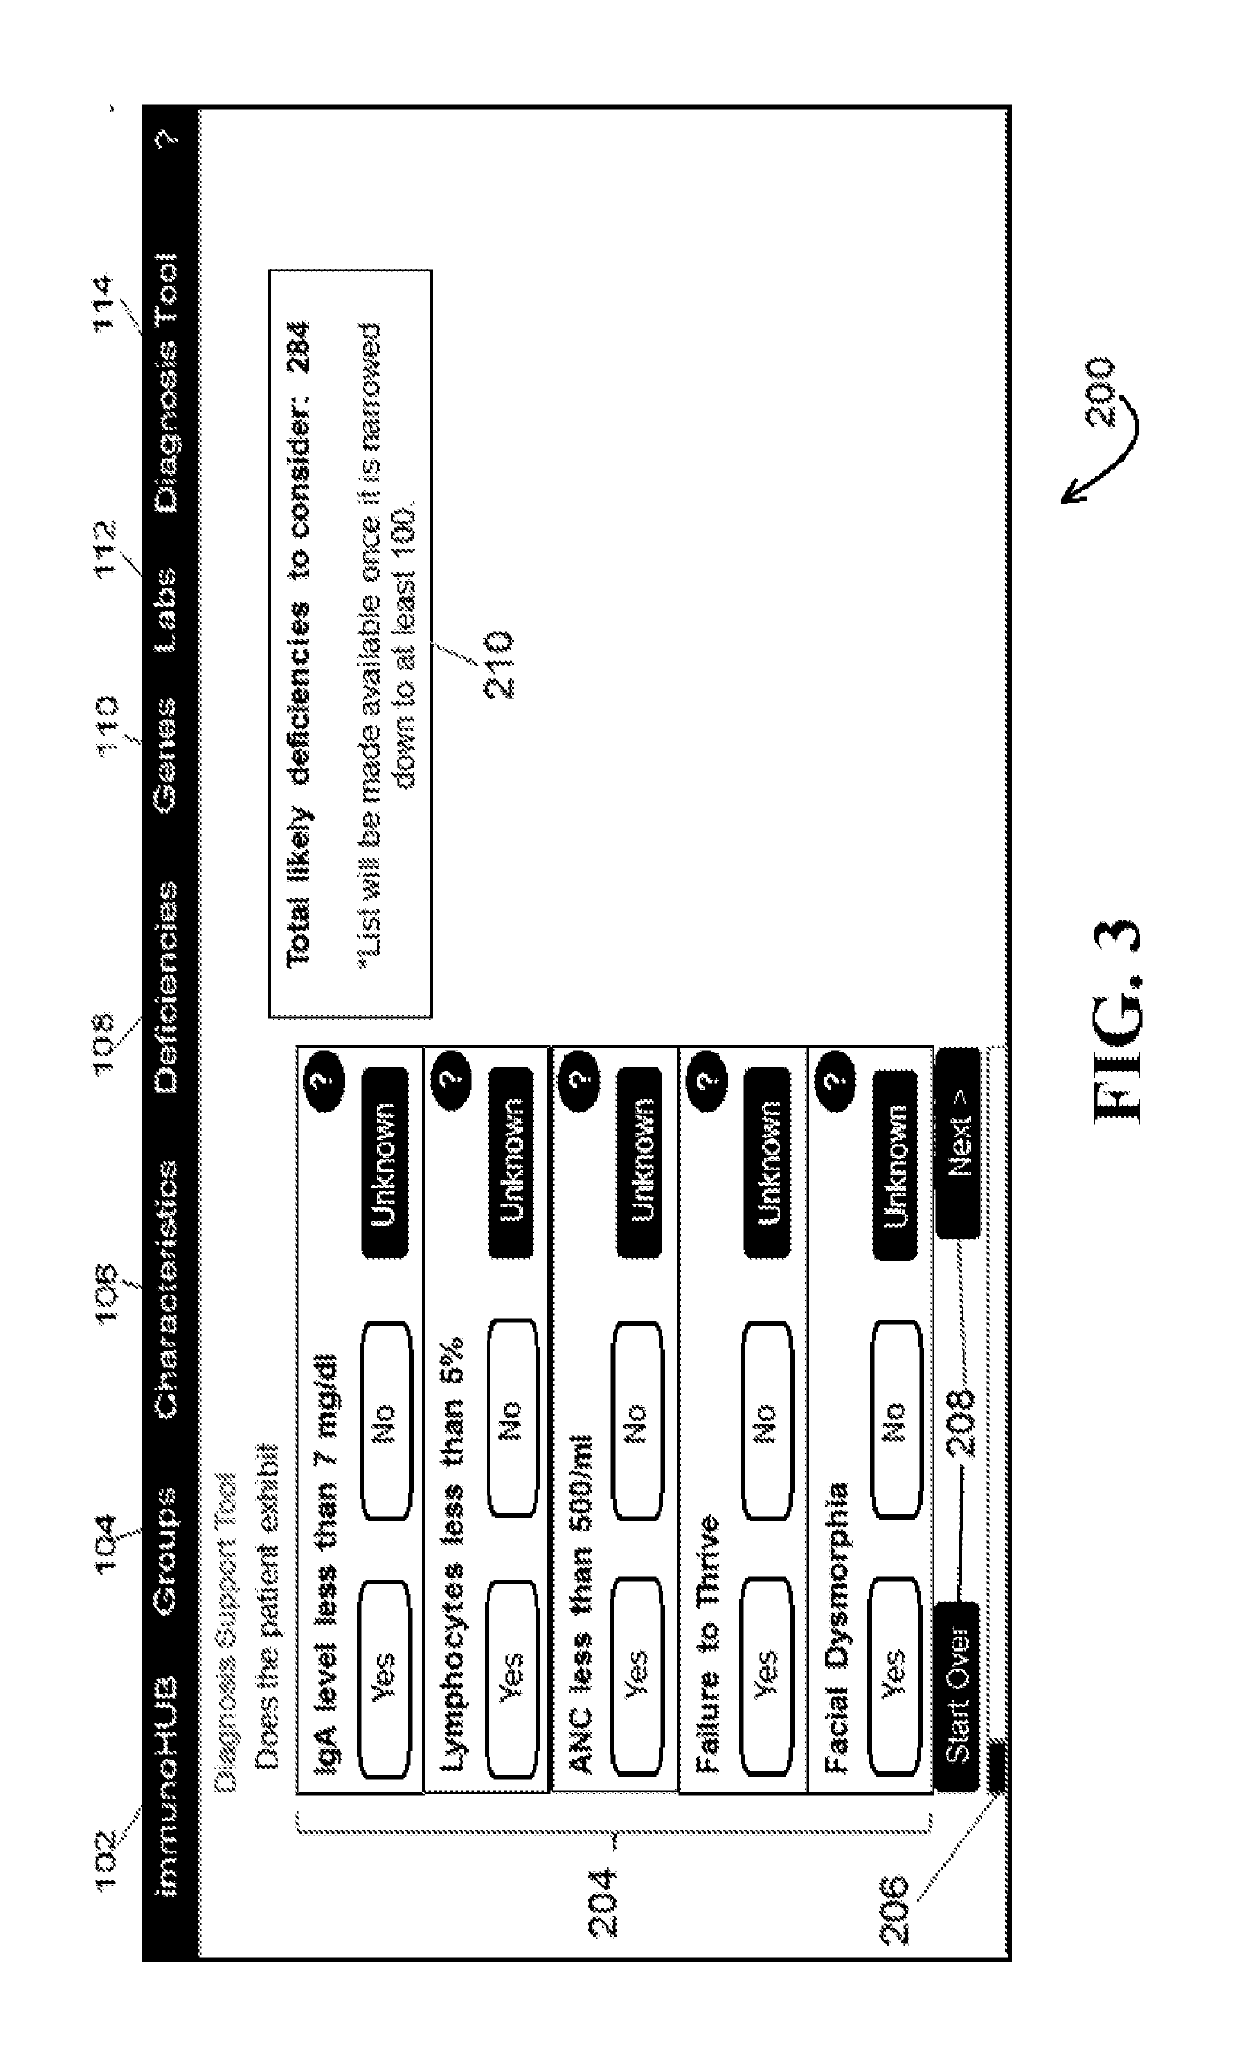 Systems, methods, and diagnostic support tools for facilitating the diagnosis of medical conditions